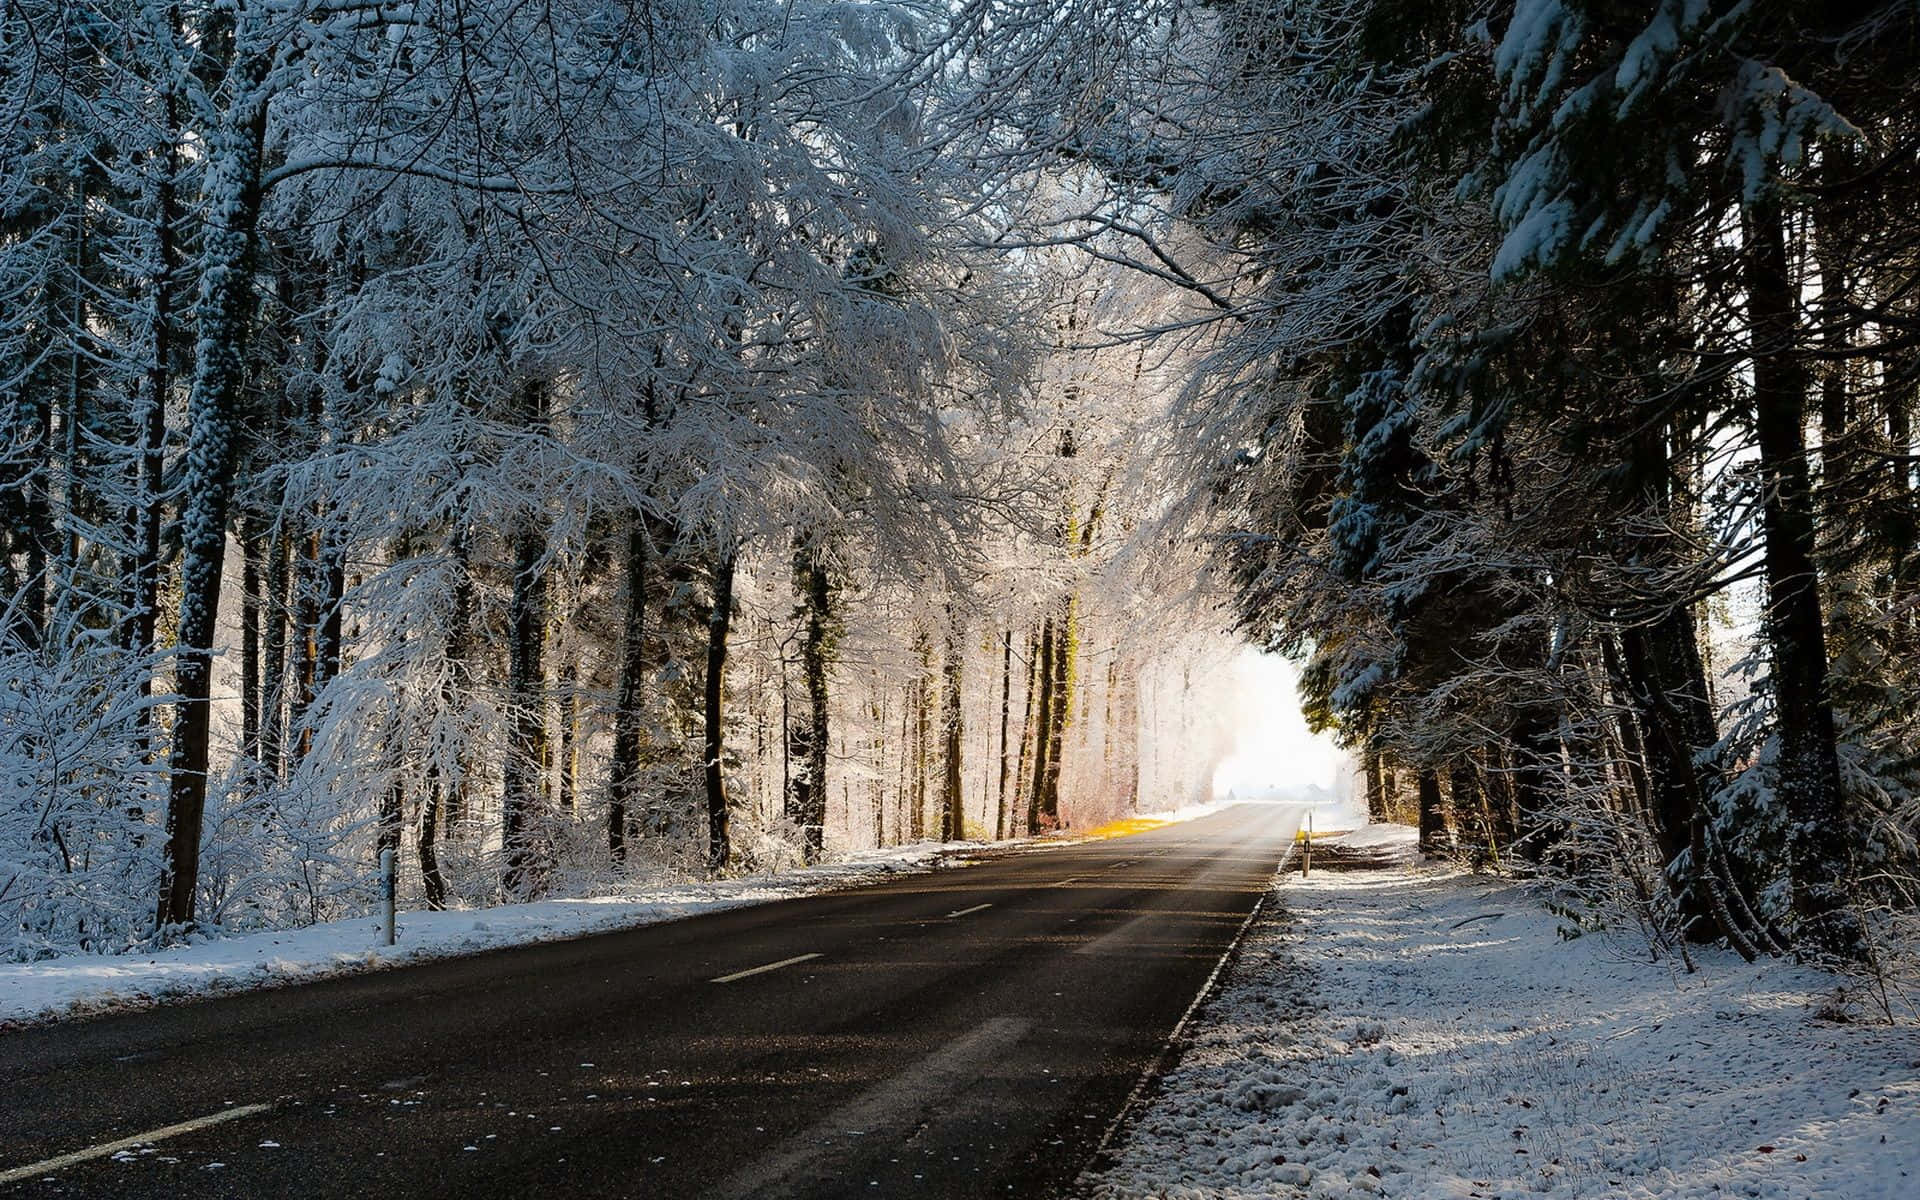 A captivating view of an icy road surrounded by snowy trees Wallpaper